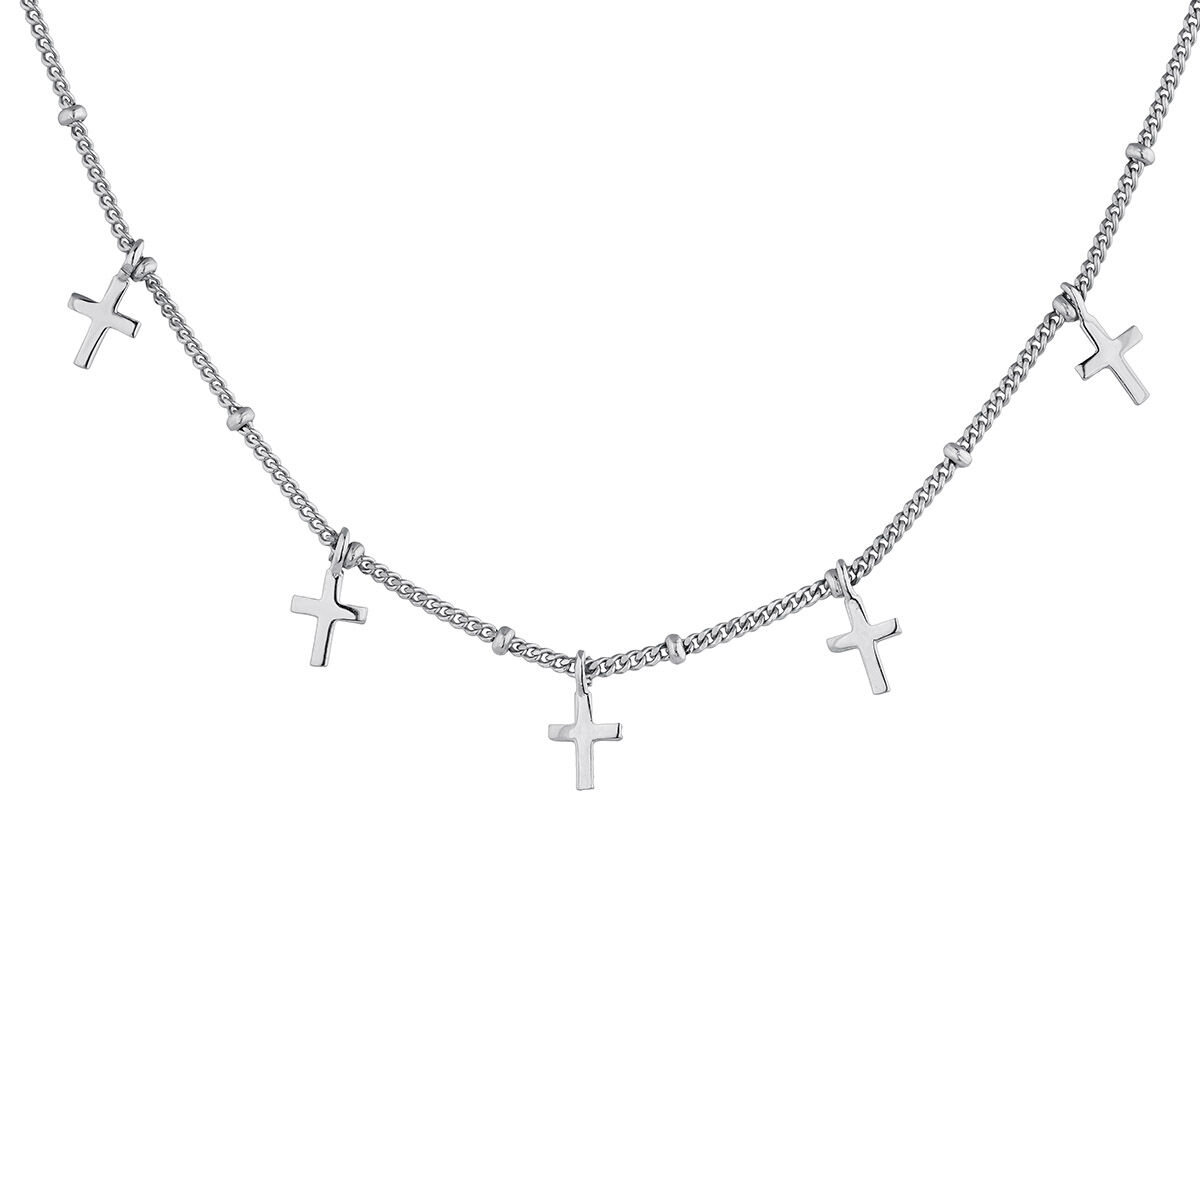 Silver necklace with several crosses , J04863-01, mainproduct